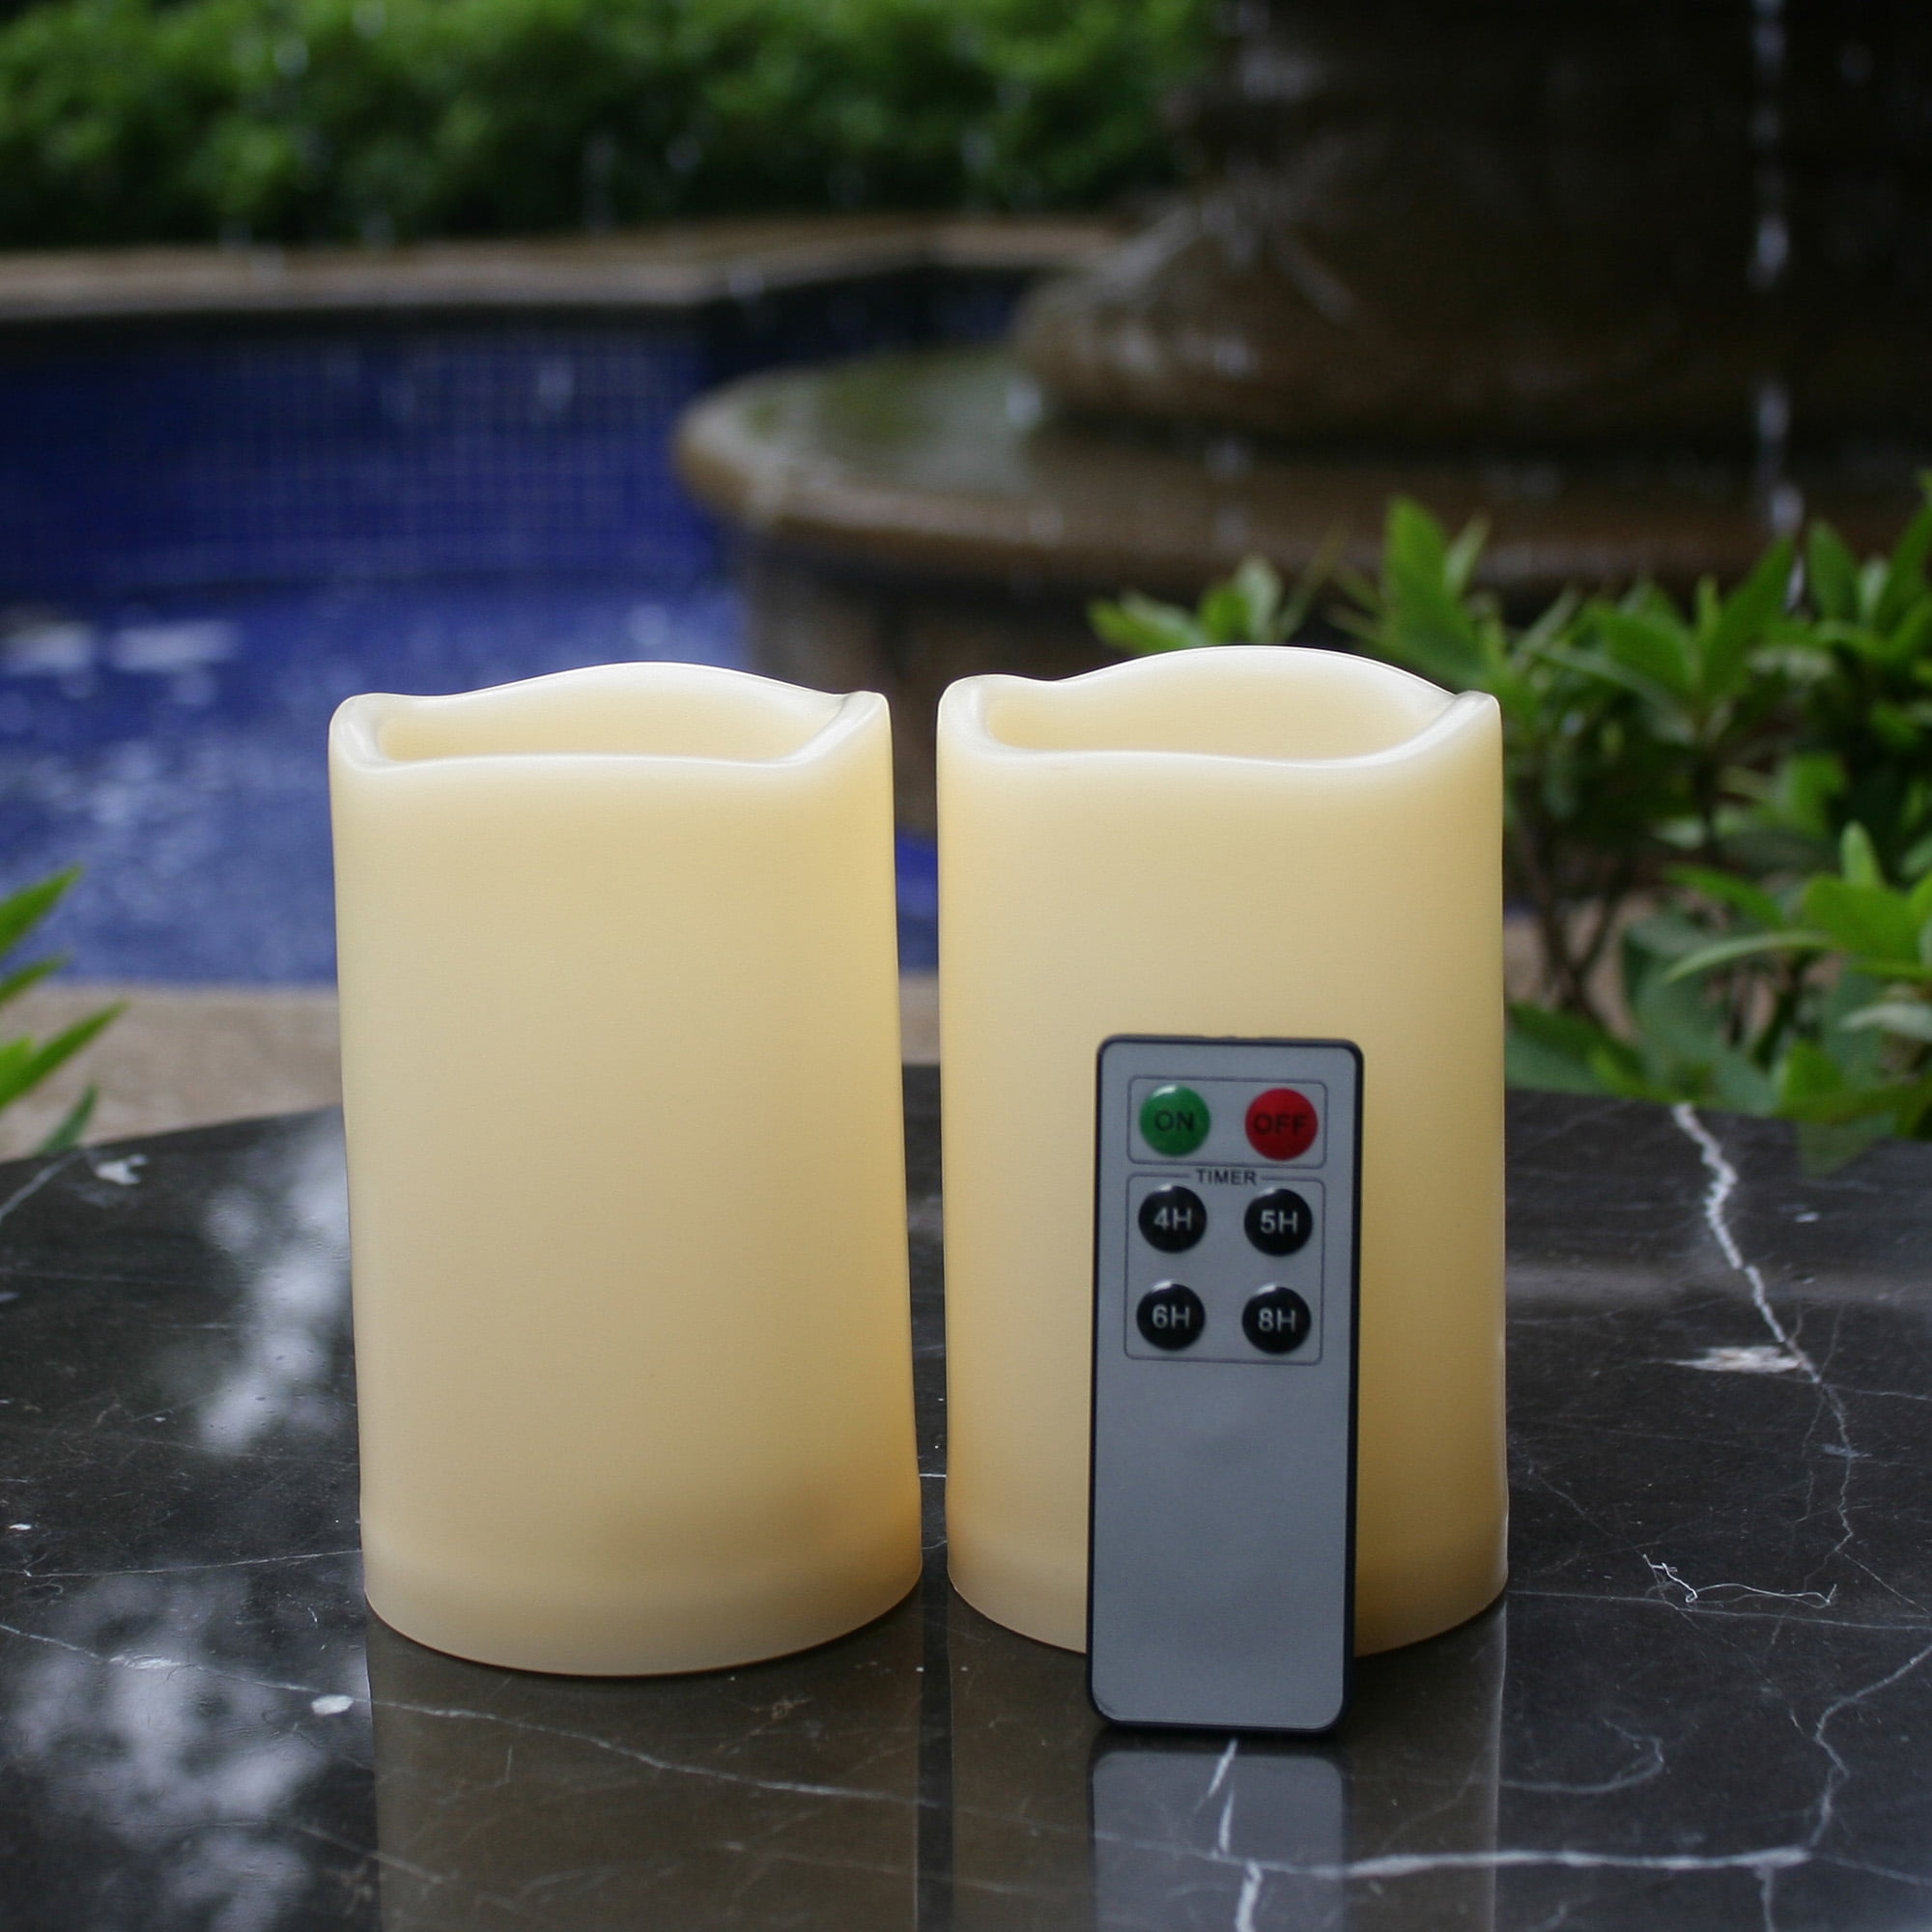 Battery Operated Flickering LED Pillar Candles with Remote and Timers for Indoor Outdoor Lanterns Set of 2 Long Lasting Large Homemory 4 x 10 Waterproof Outdoor Flameless Candles